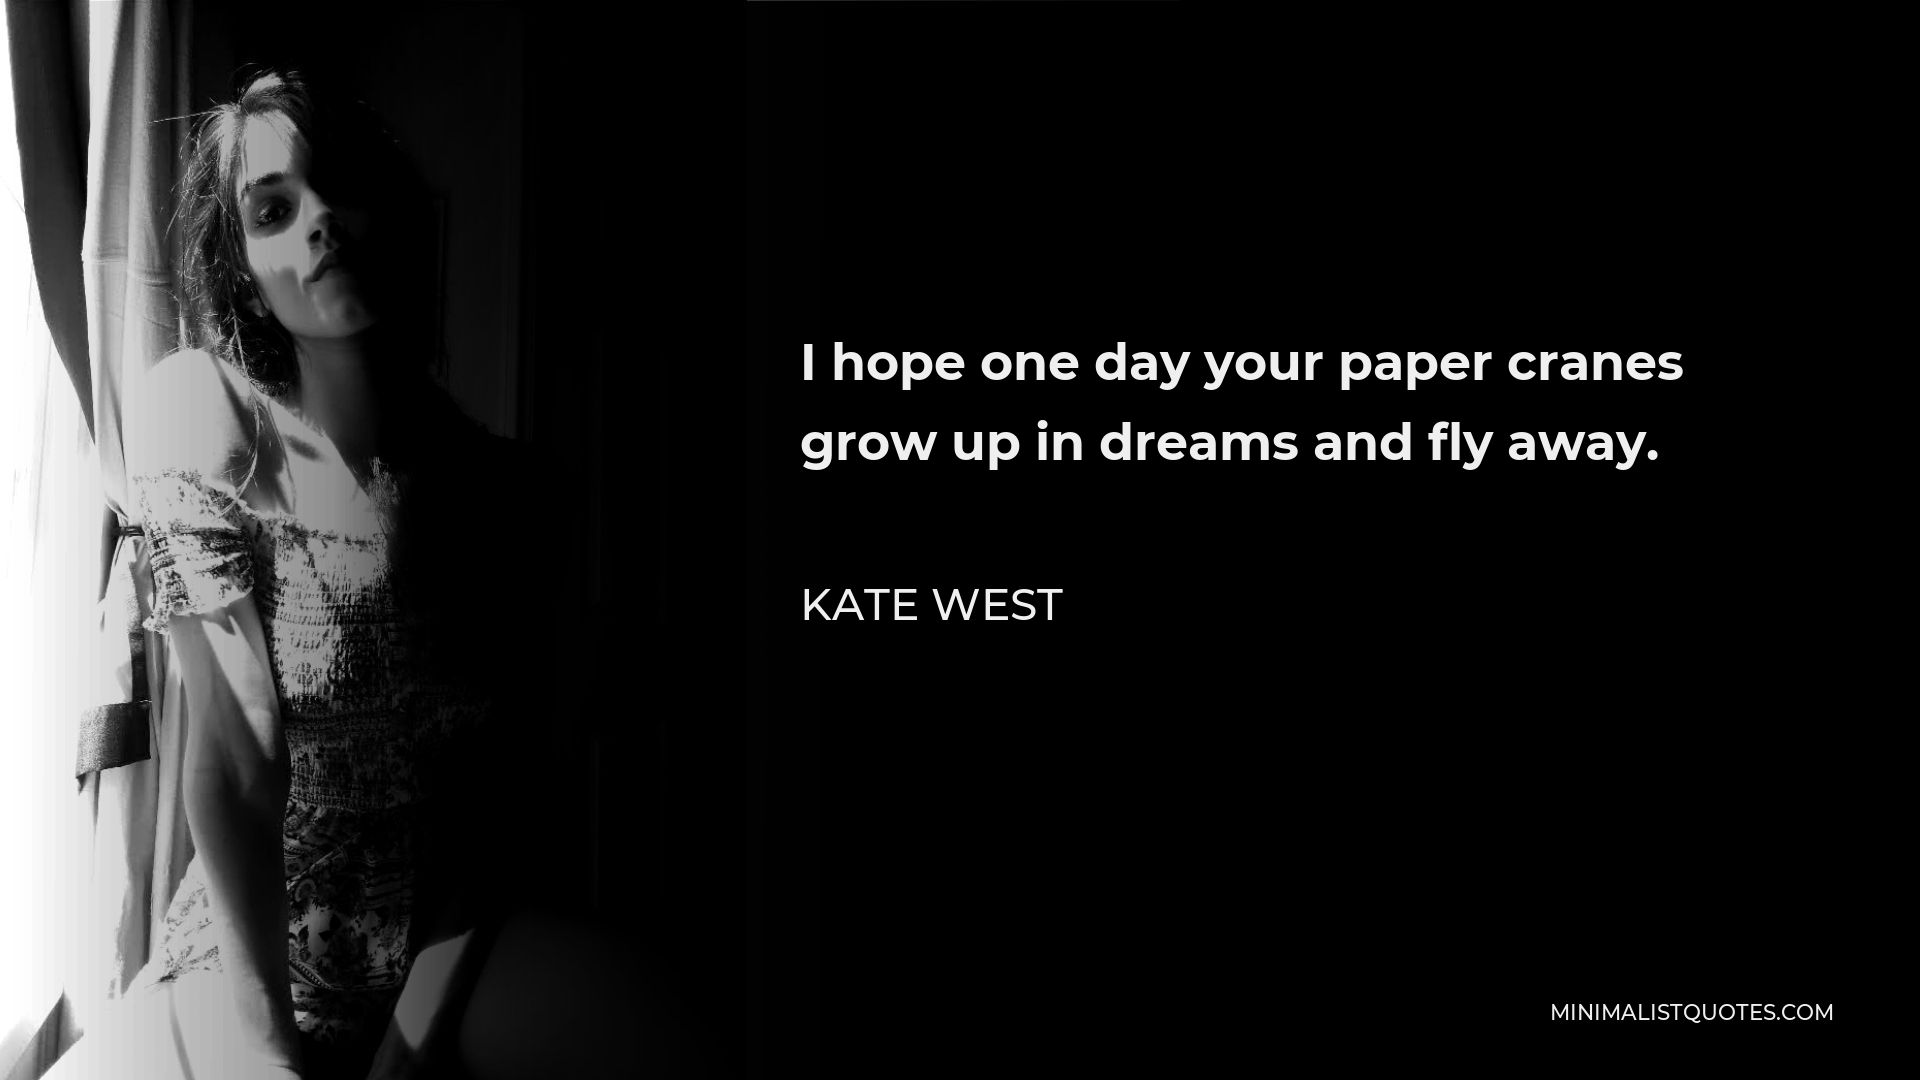 Kate West Quote - I hope one day your paper cranes grow up in dreams and fly away.